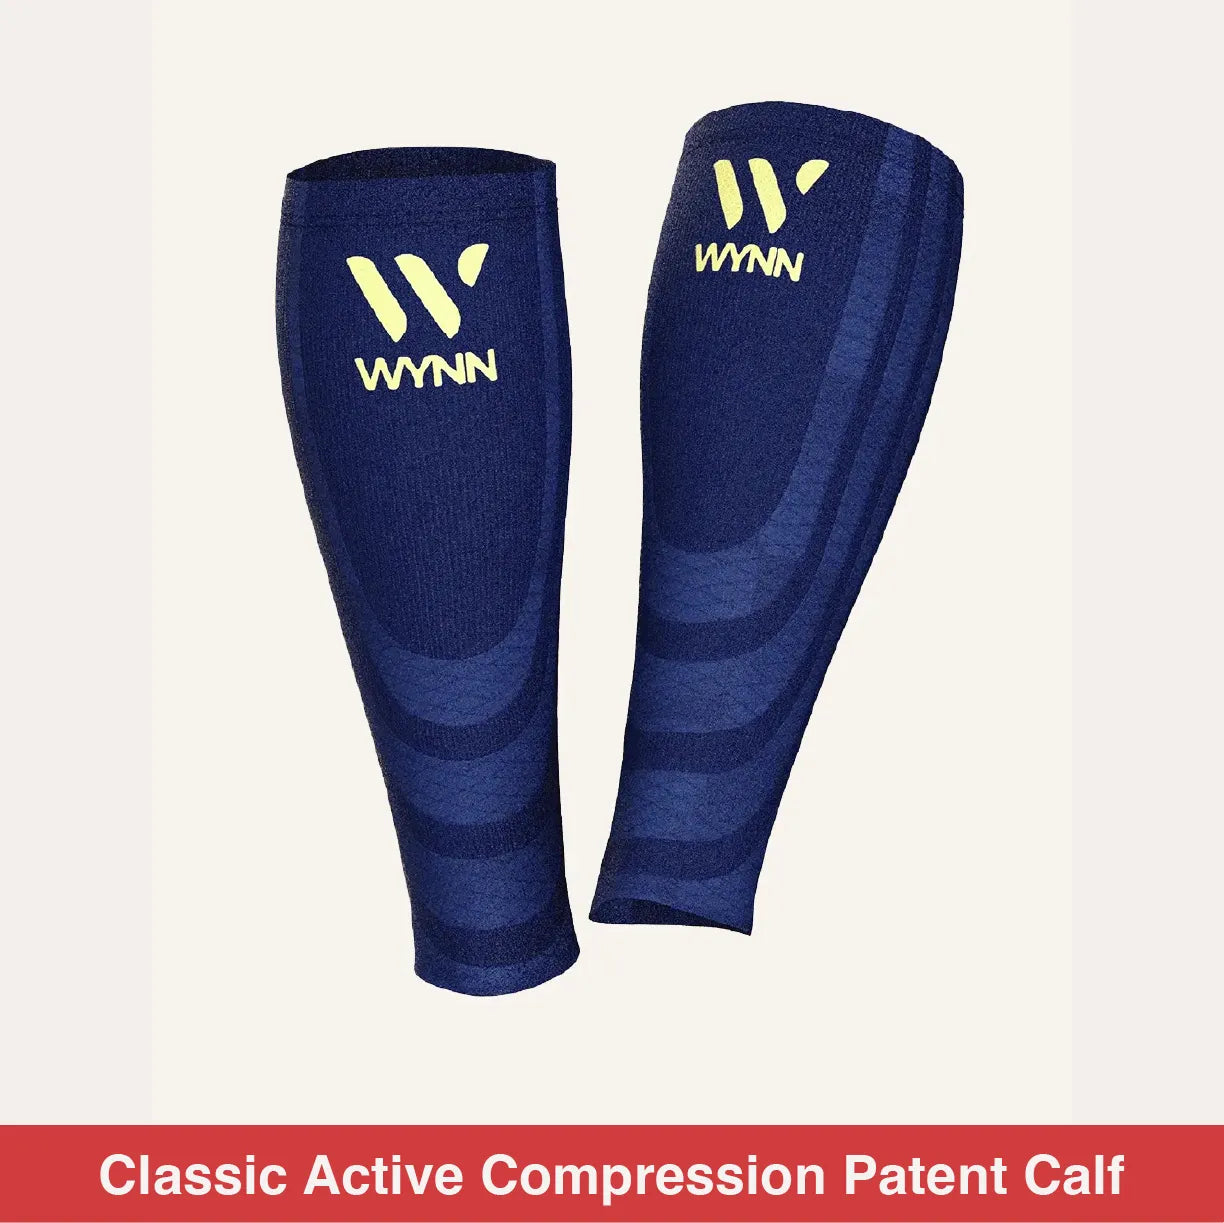 Light Active Compression Patent Calf Sleeves 18-20 mmHg